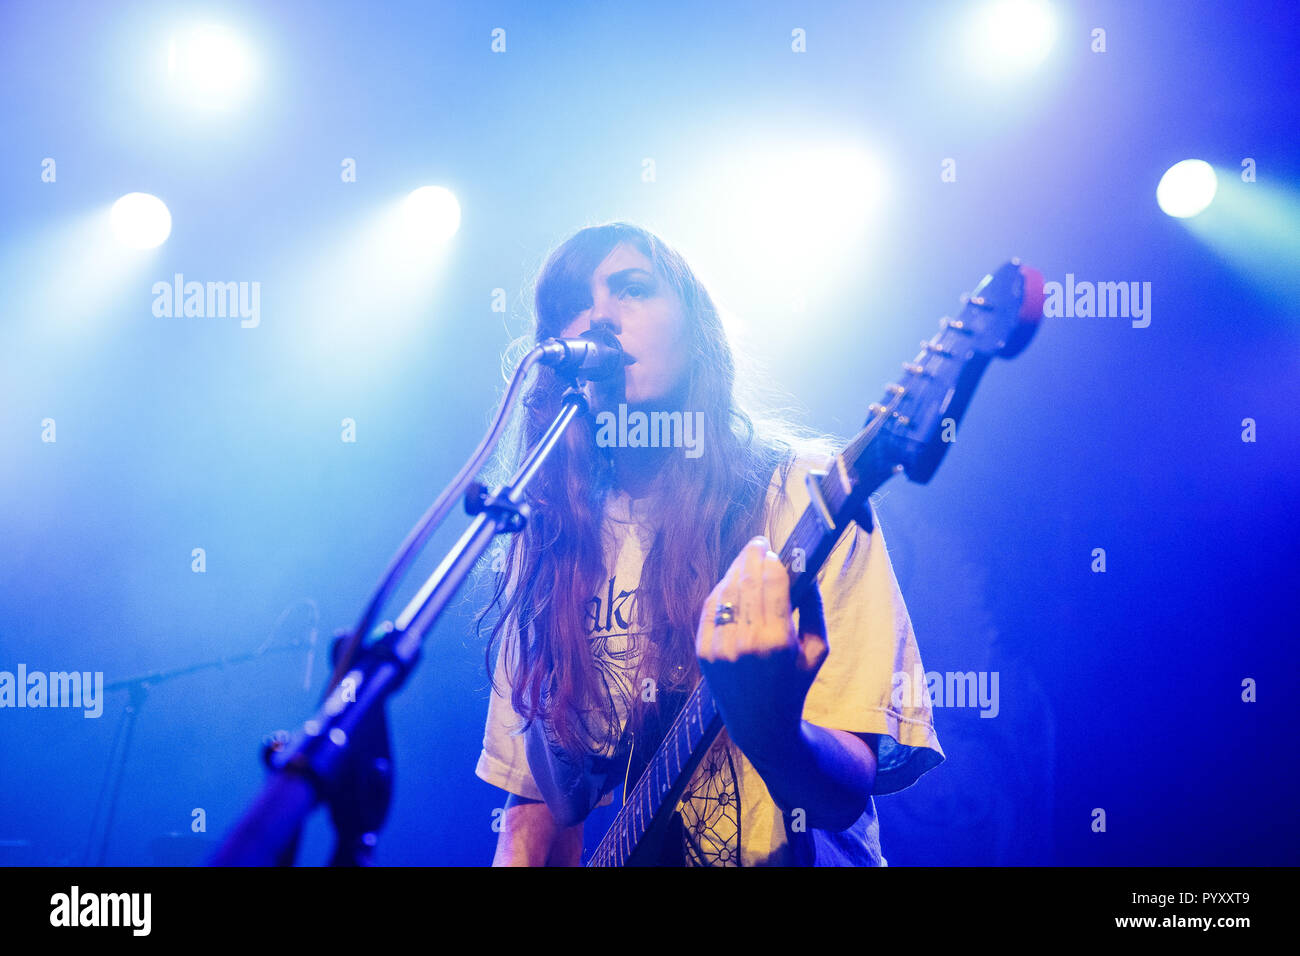 Denmark, Copenhagen - Ocotber 29, 2018. The American singer, musician and composer Emma Ruth Rundle performs a live concert at Hotel Cecil in Copenhagen. (Photo credit: Gonzales Photo - Peter Troest). Stock Photo